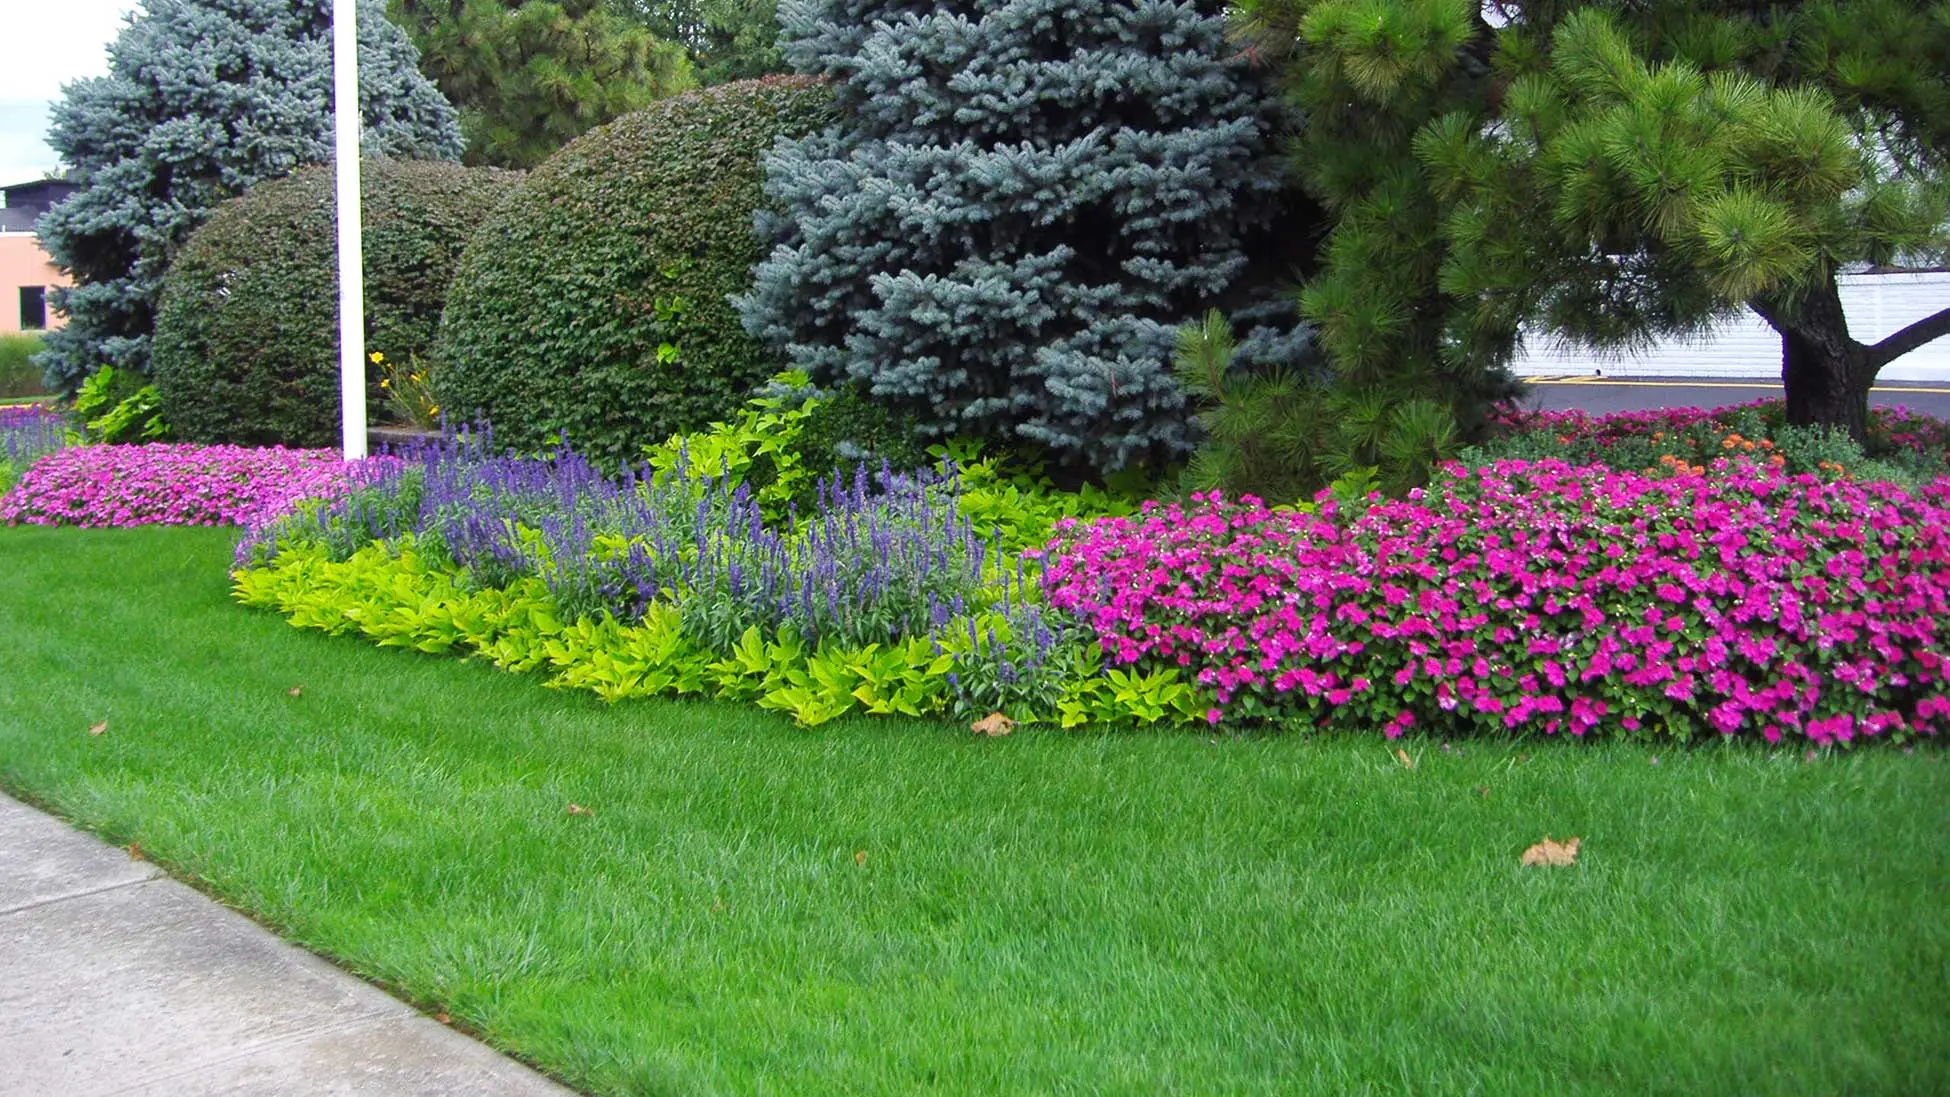 Our expert designers create softscapes that grab attention and increase curb appeal for your property.